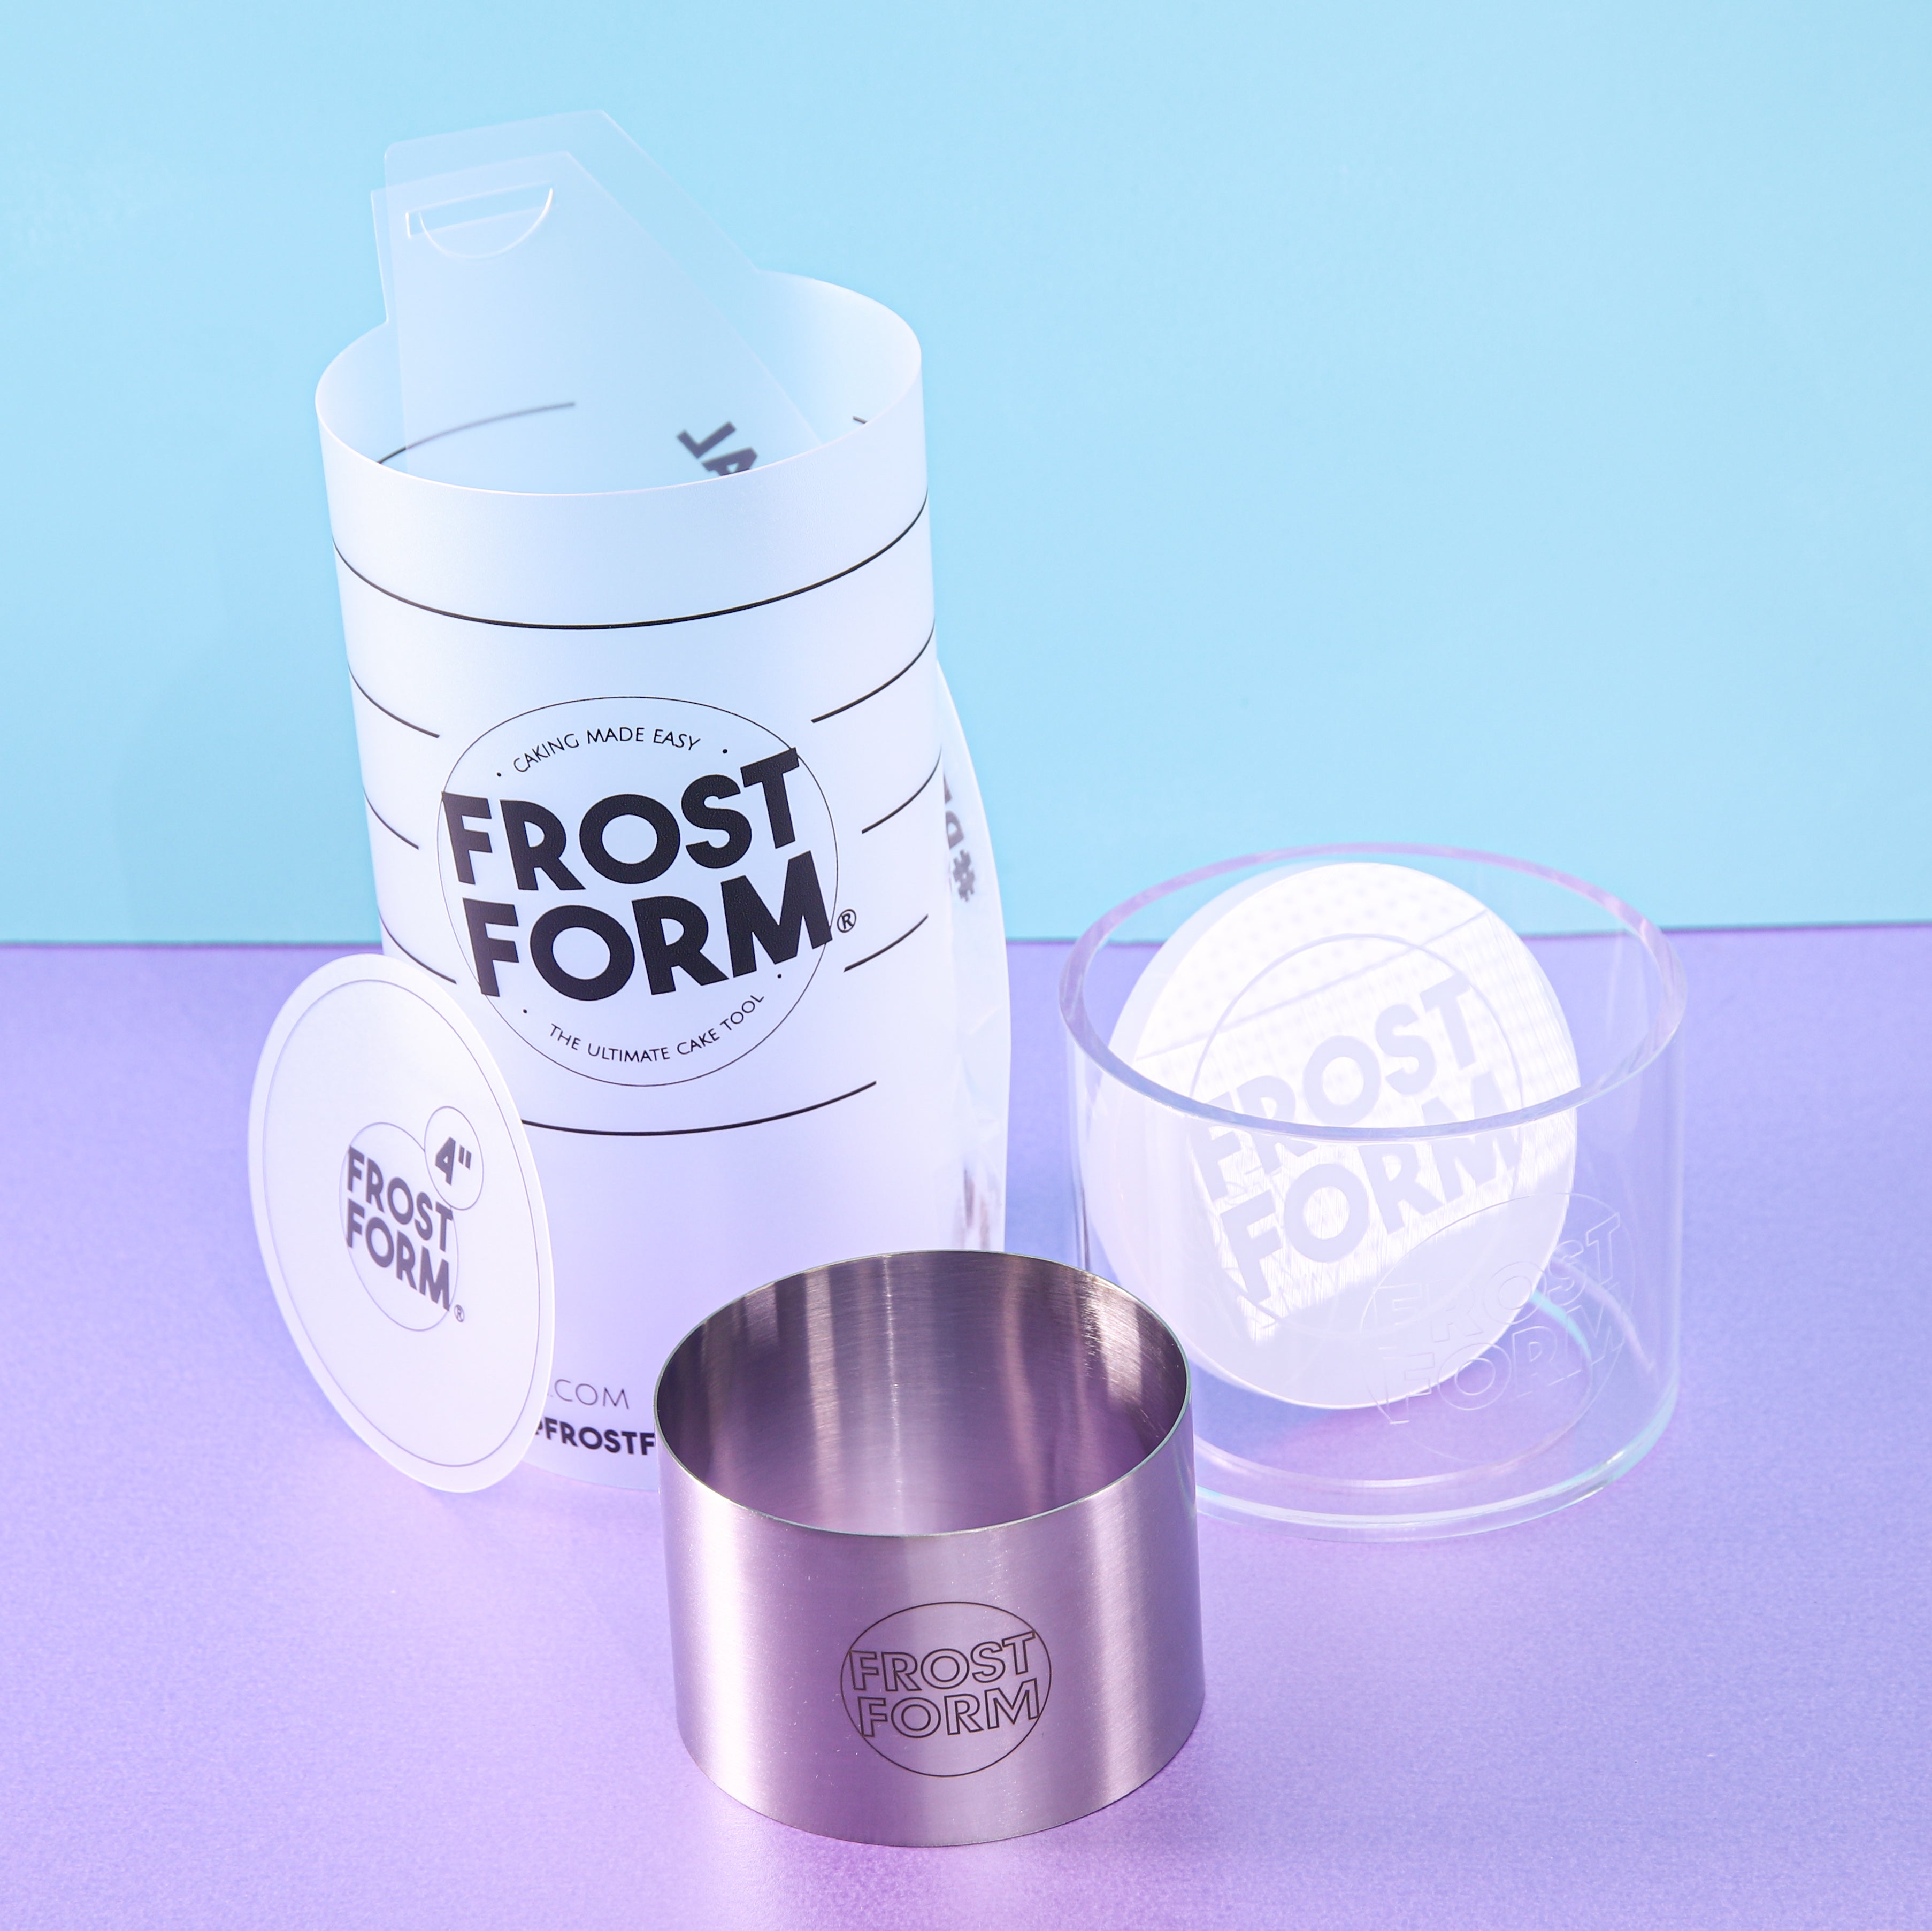 Frost Form- The Round Kit - Tools & Equipment from Cake Craft Company UK